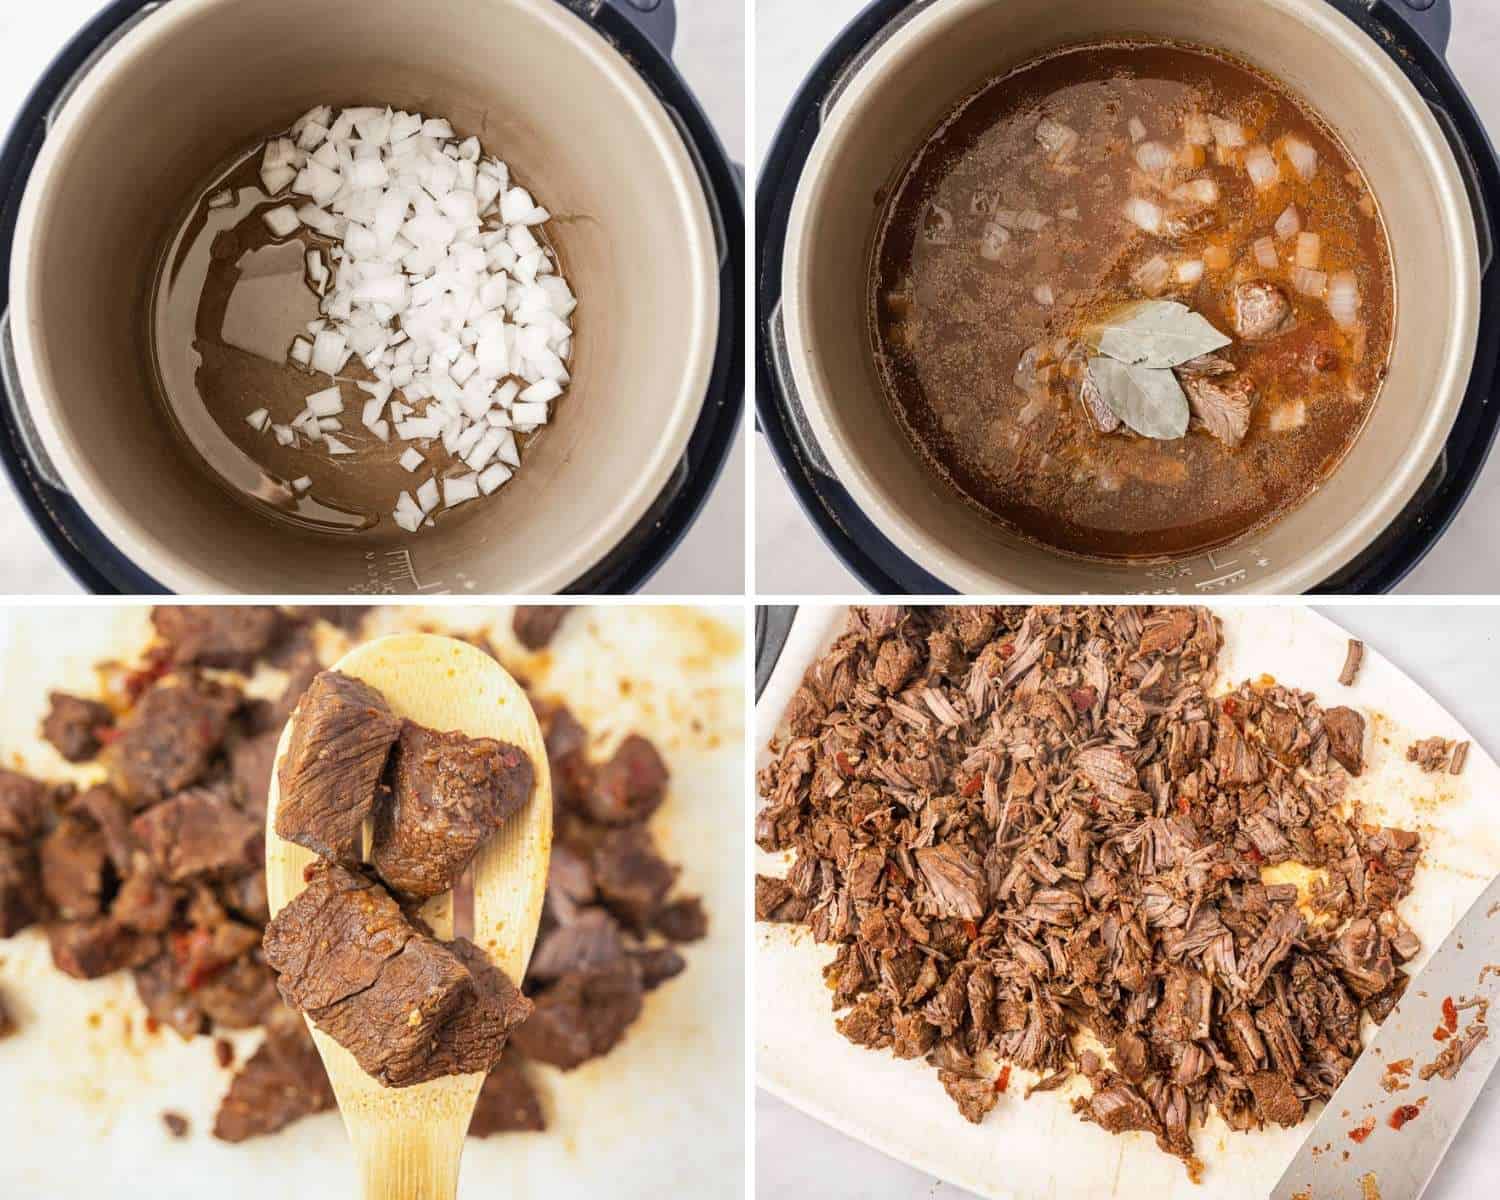 Collage of four images showing how to make birria stew